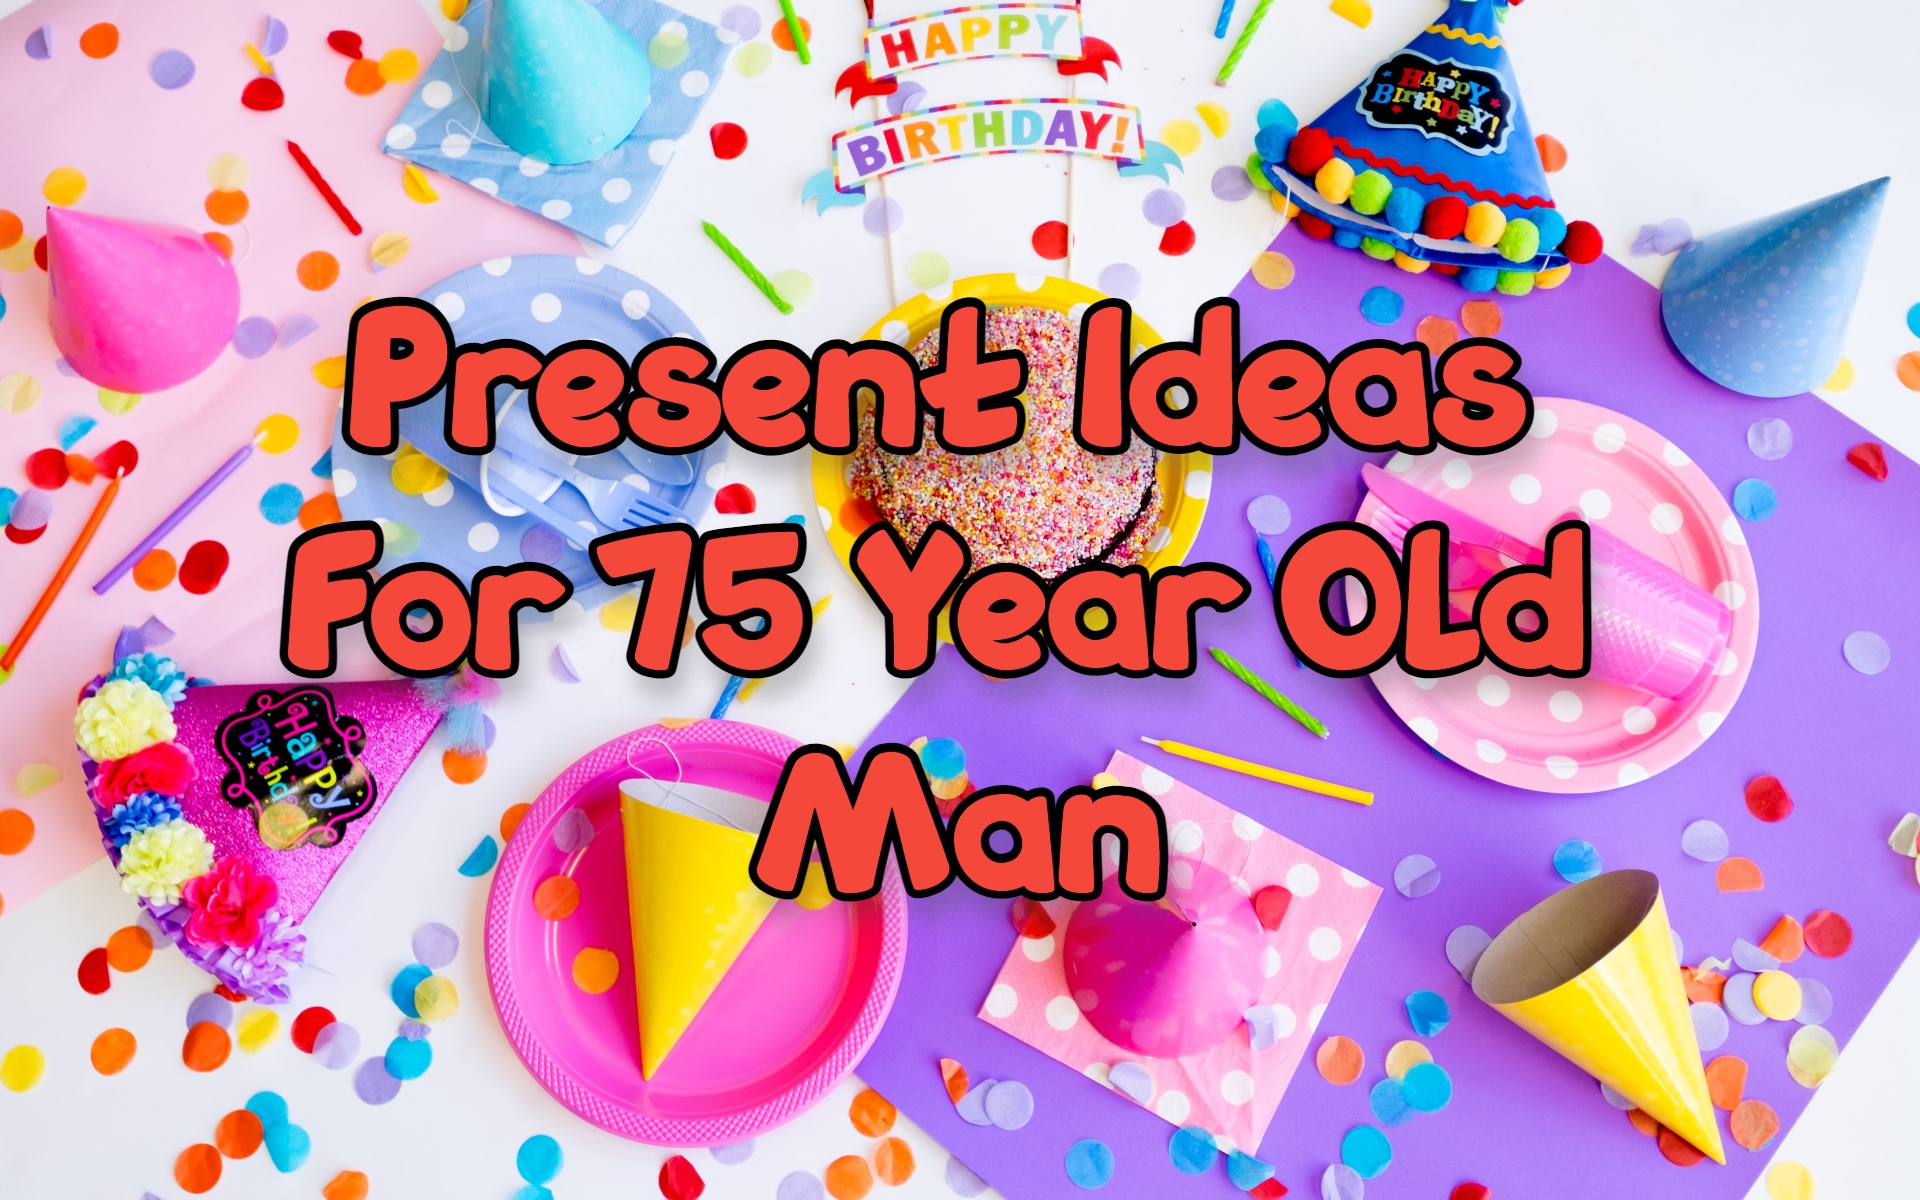 Cover image of gift ideas for 75-year-old man by Giftsedge